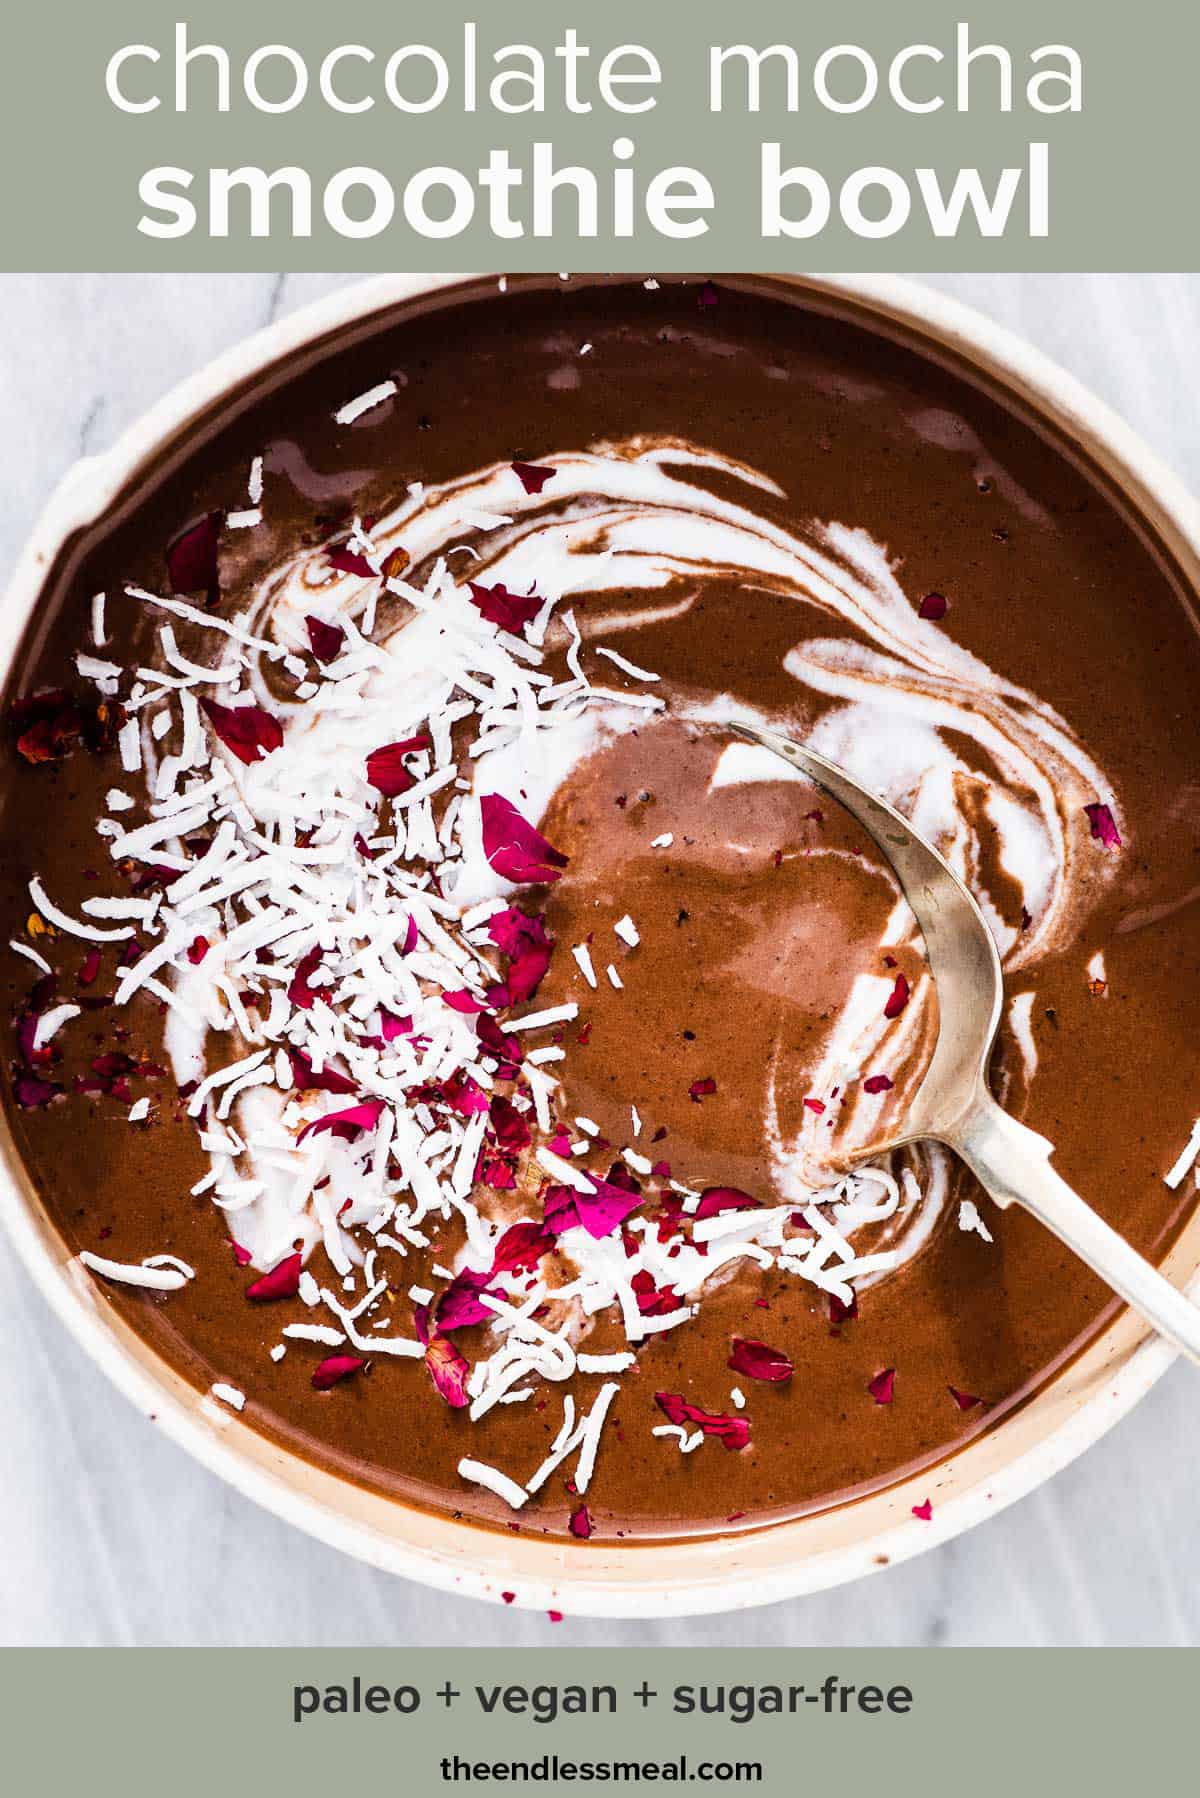 Mocha smoothie in a bowl with pink flowers on the top with the recipe title on the picture.